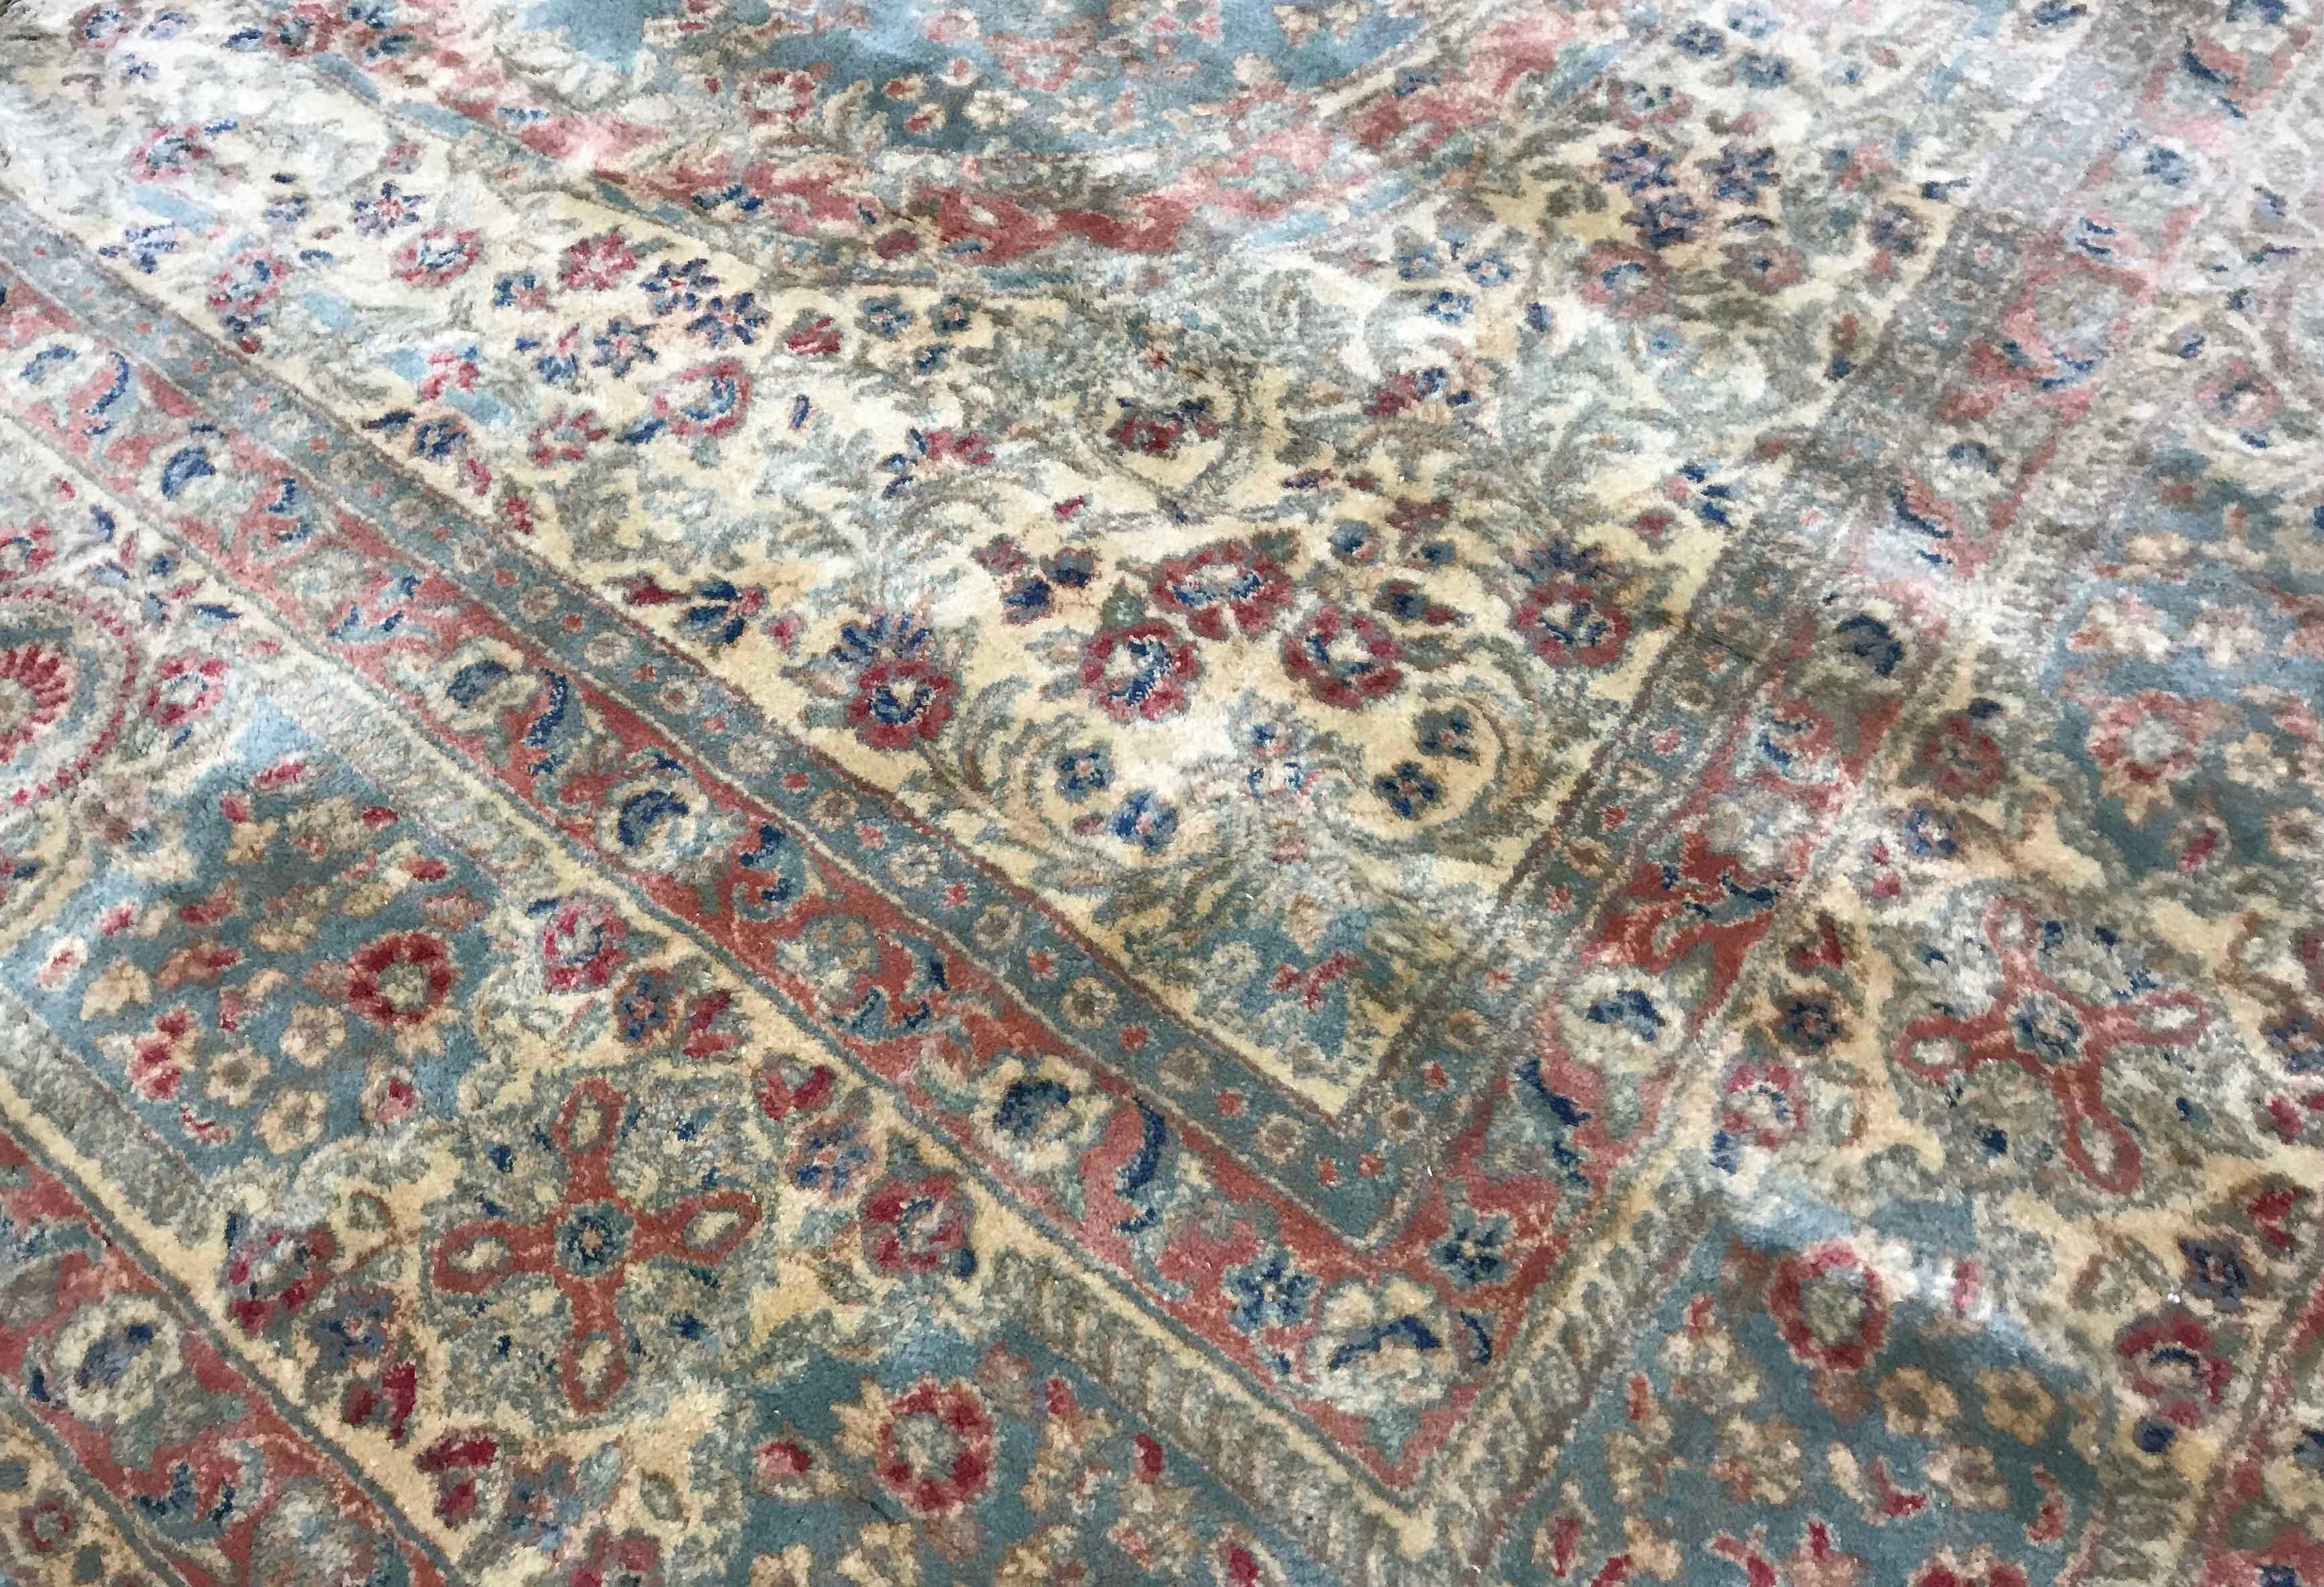 Vintage Persian Kerman rug, circa 1940. The soft blue ground of this Kerman rug is the setting for wonderful floral designs both in the central medallion the frame of the main field and the borders to create this soft and relaxing rug. Size: 10'11 x